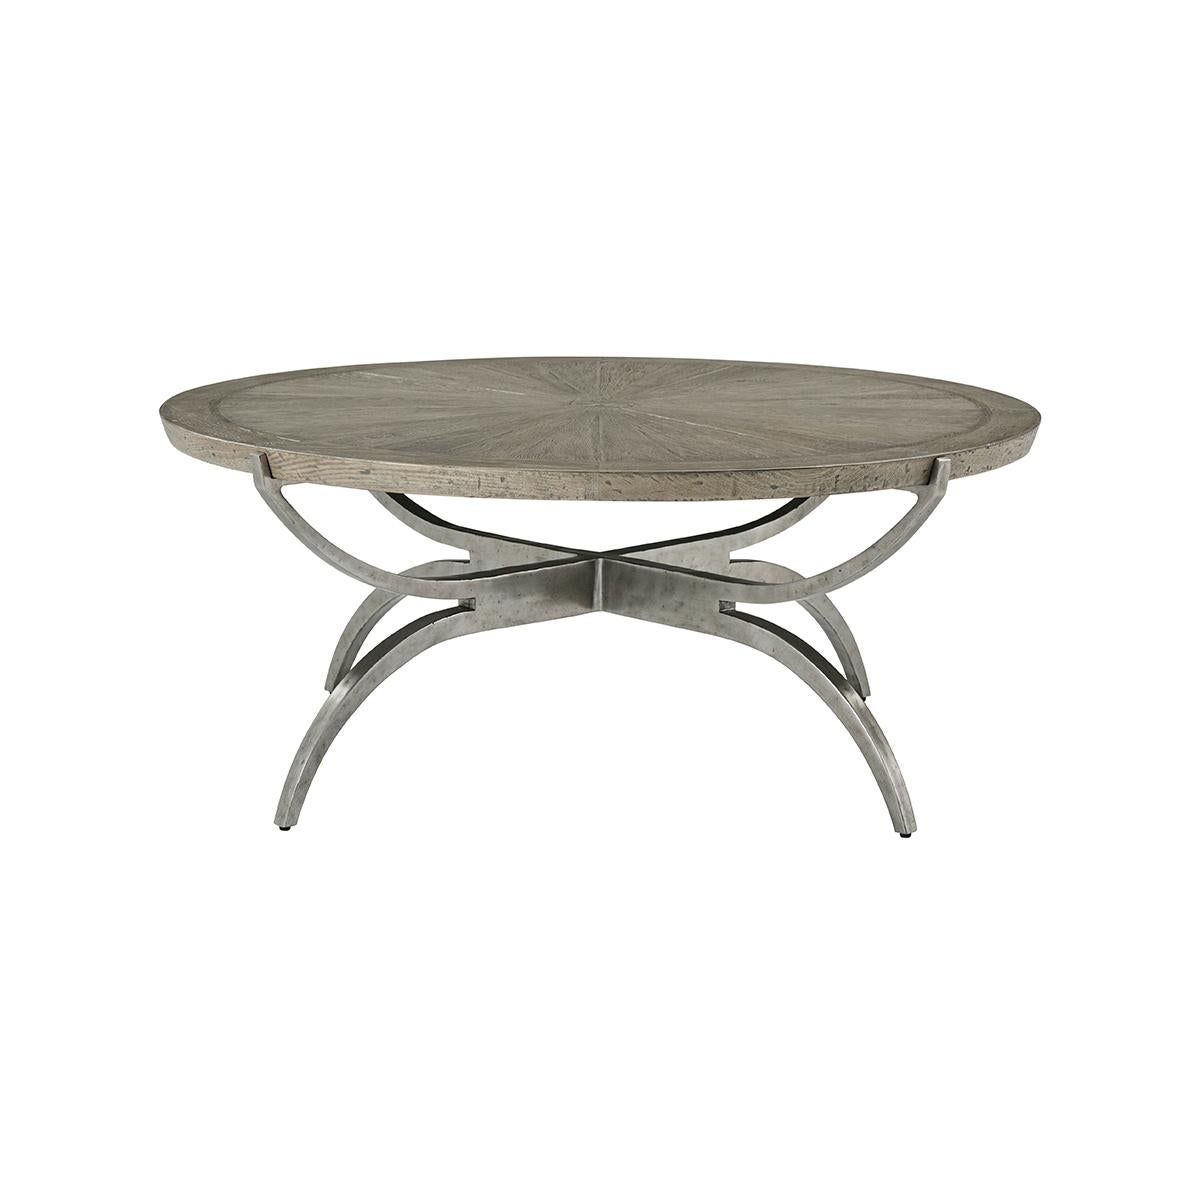 Vietnamese Industrial Cocktail Table For Sale